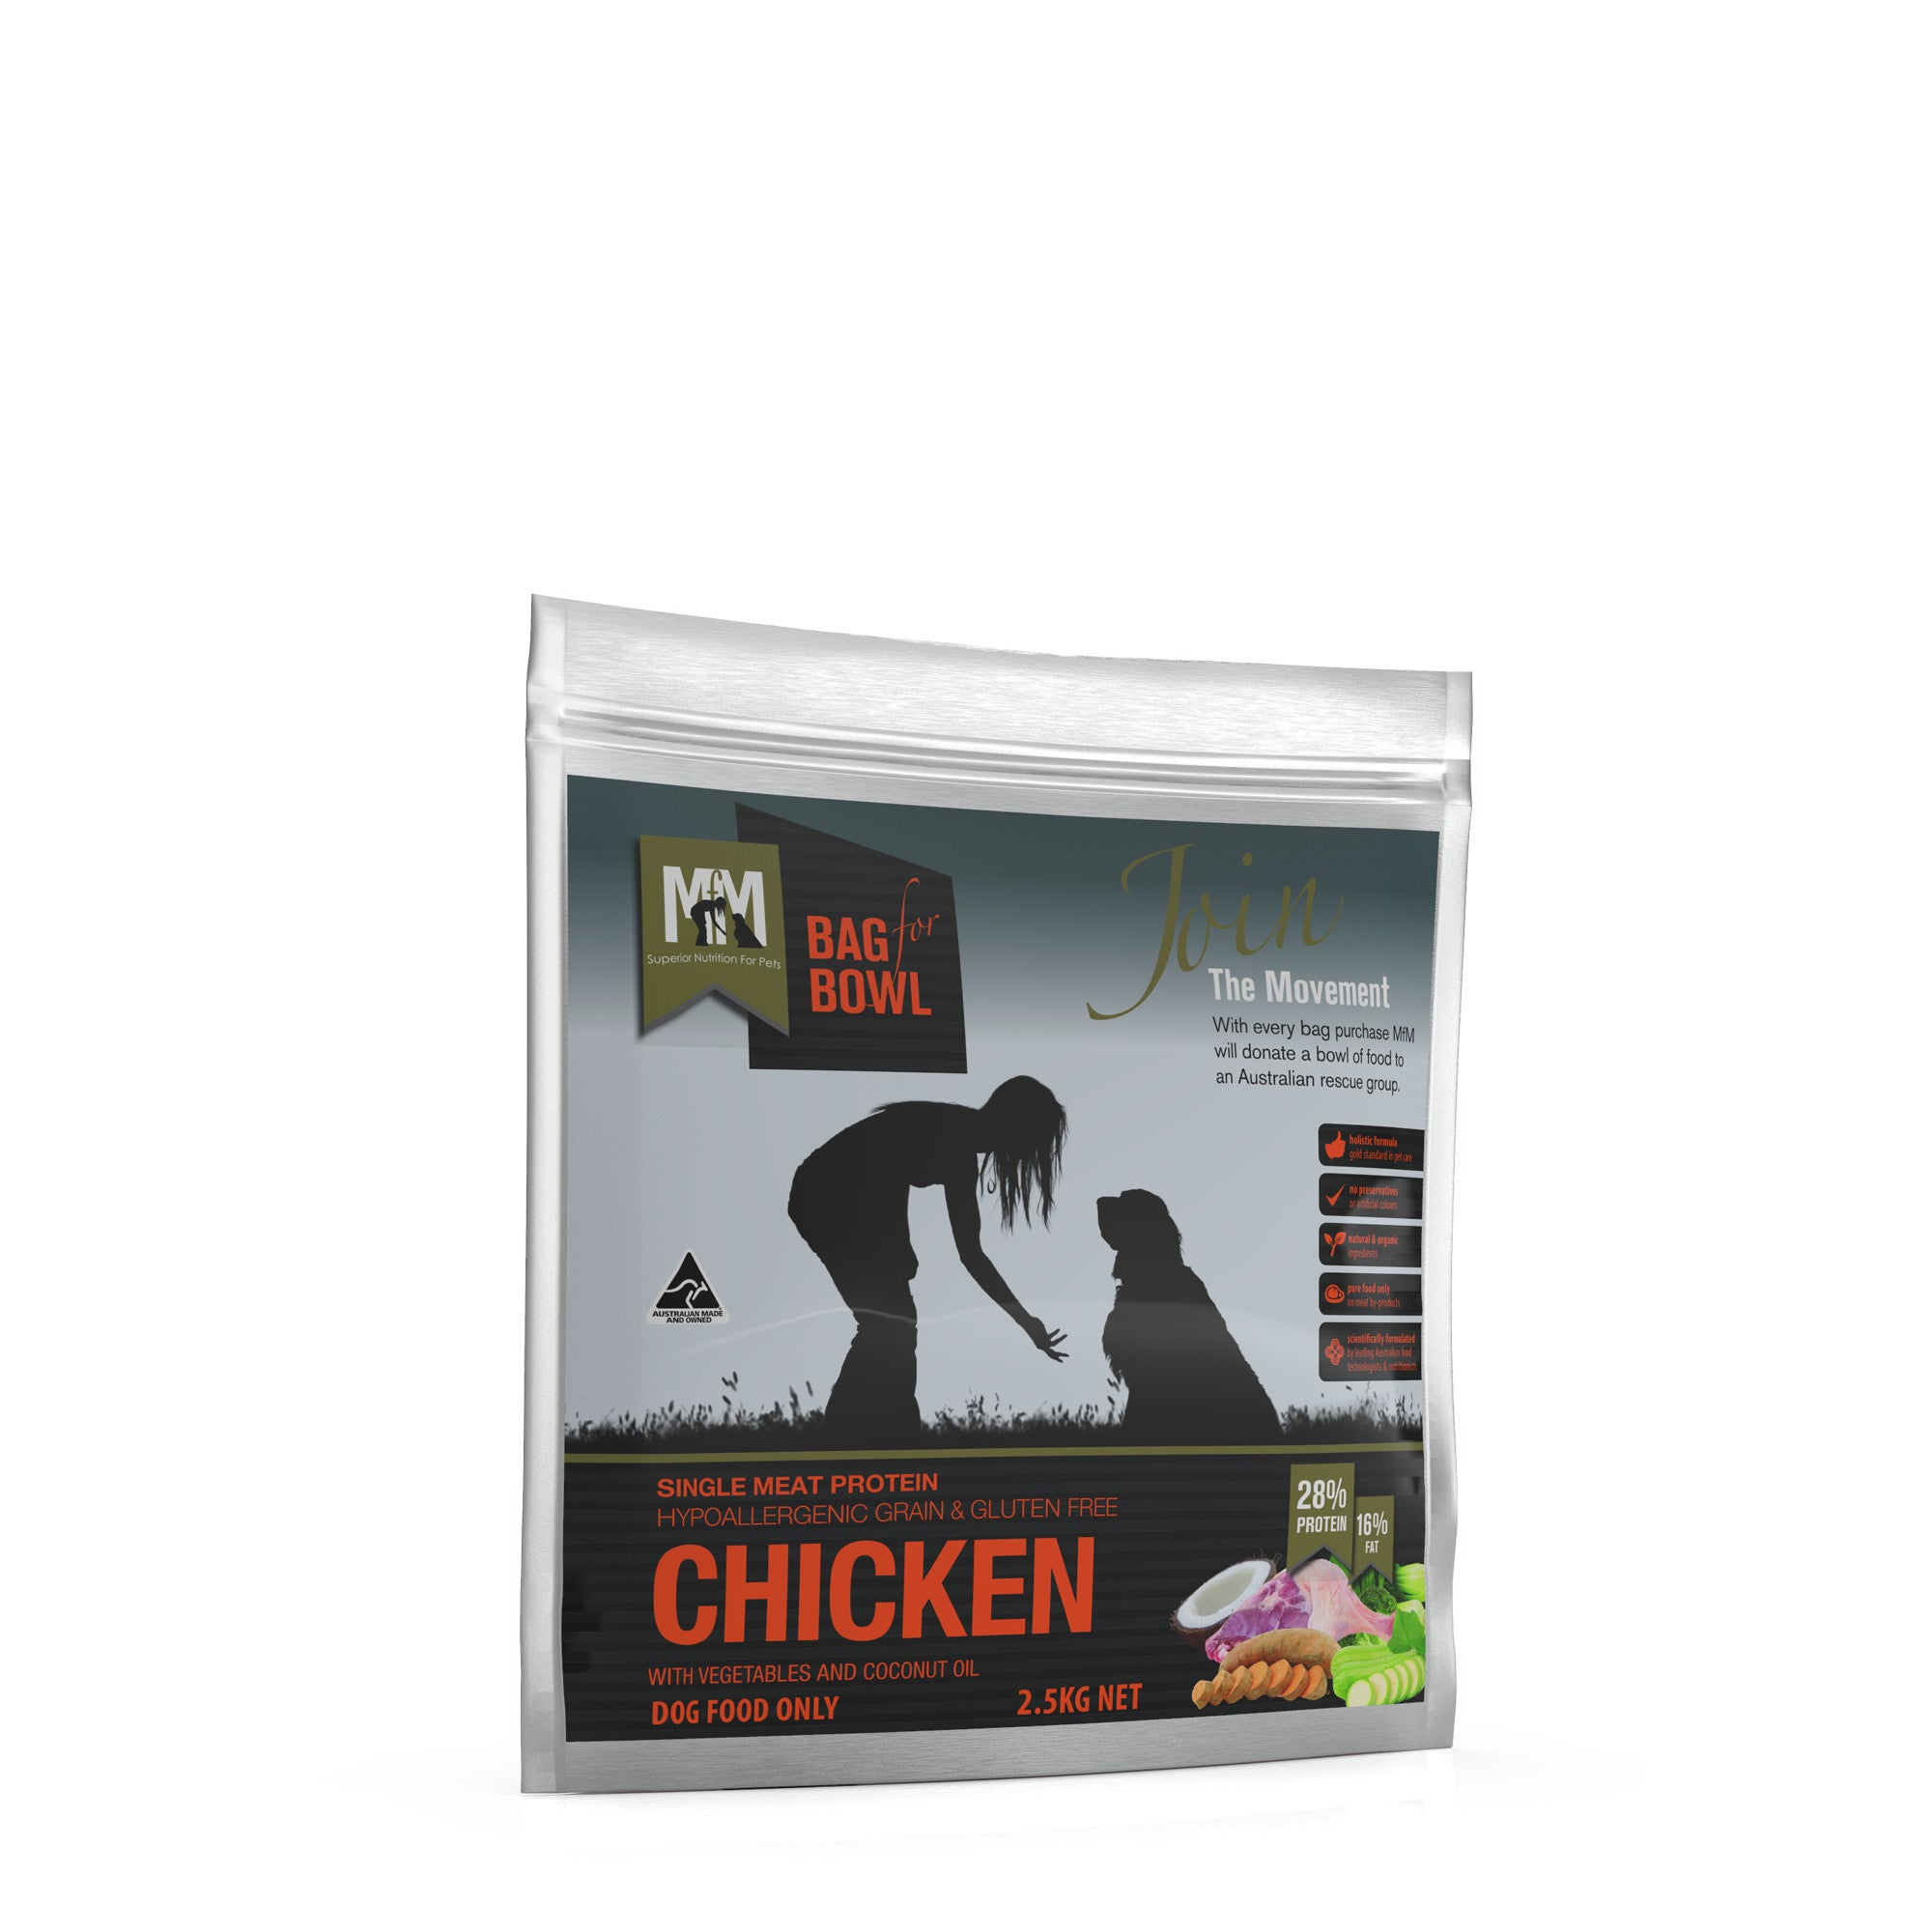 Meals for Mutts Chicken Single Meat Protein Dog Food 2.5kg.